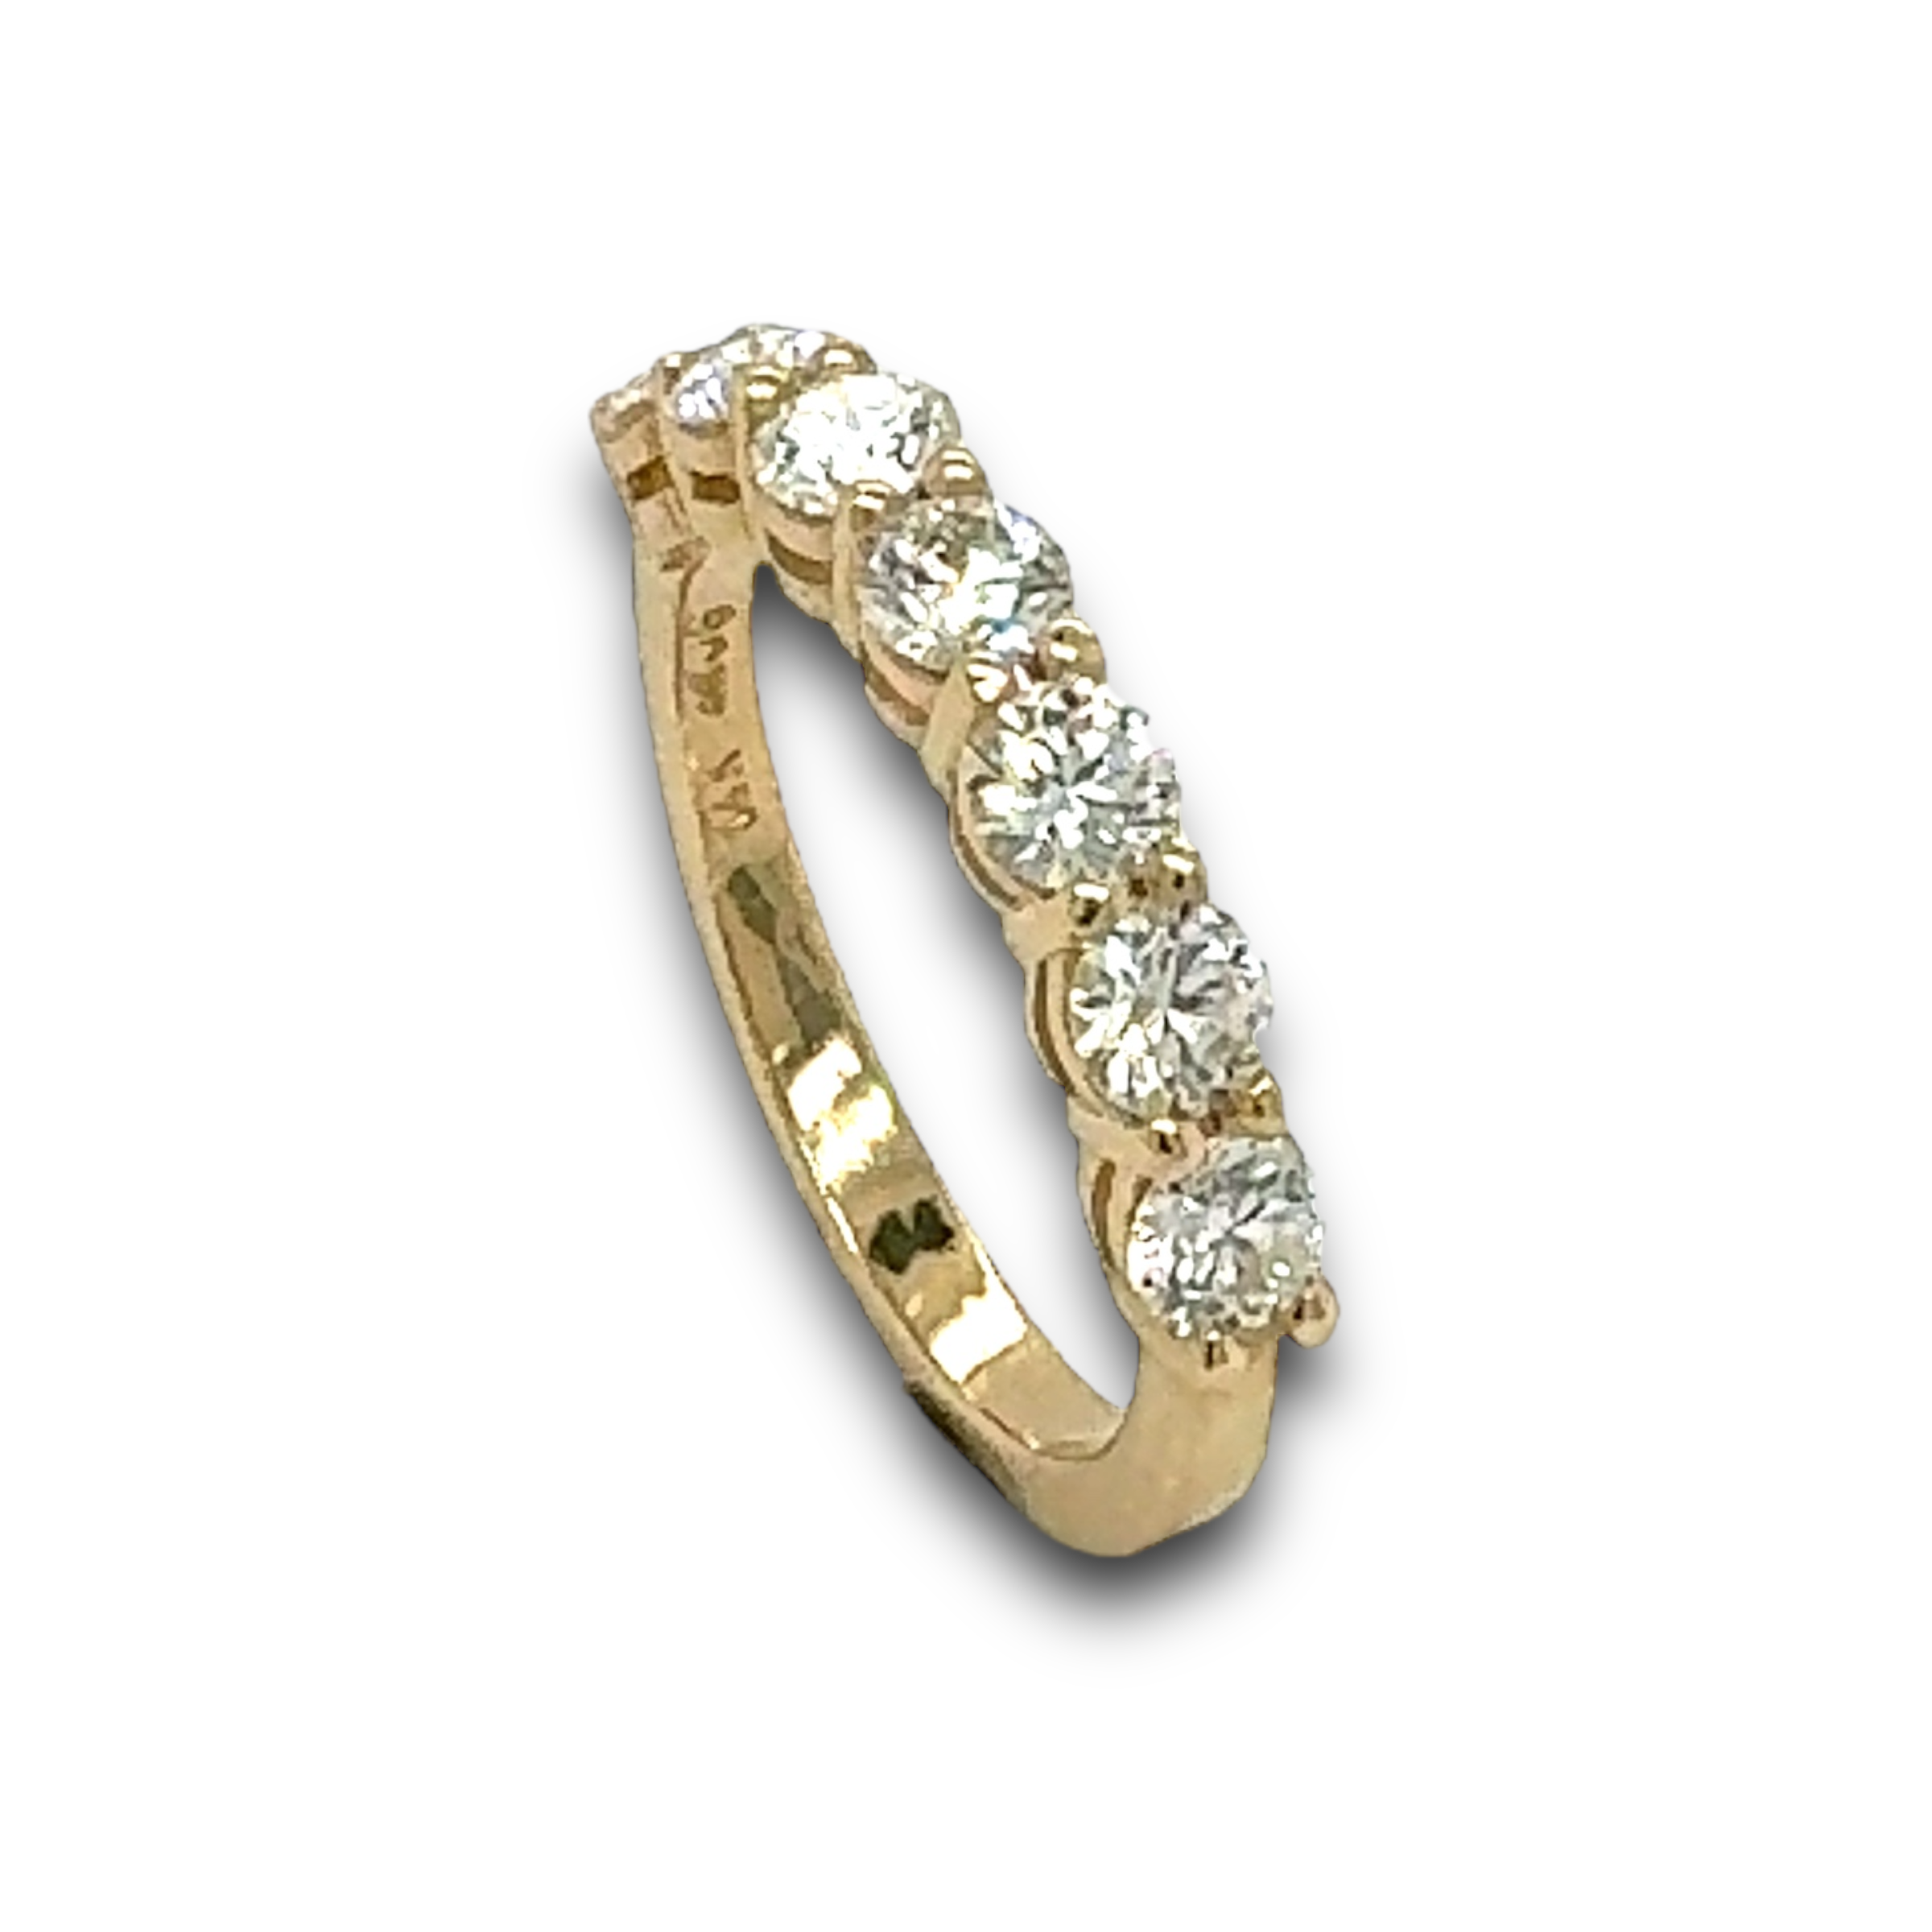 1.07 Carat total weight Diamond Wedding Band in Yellow Gold